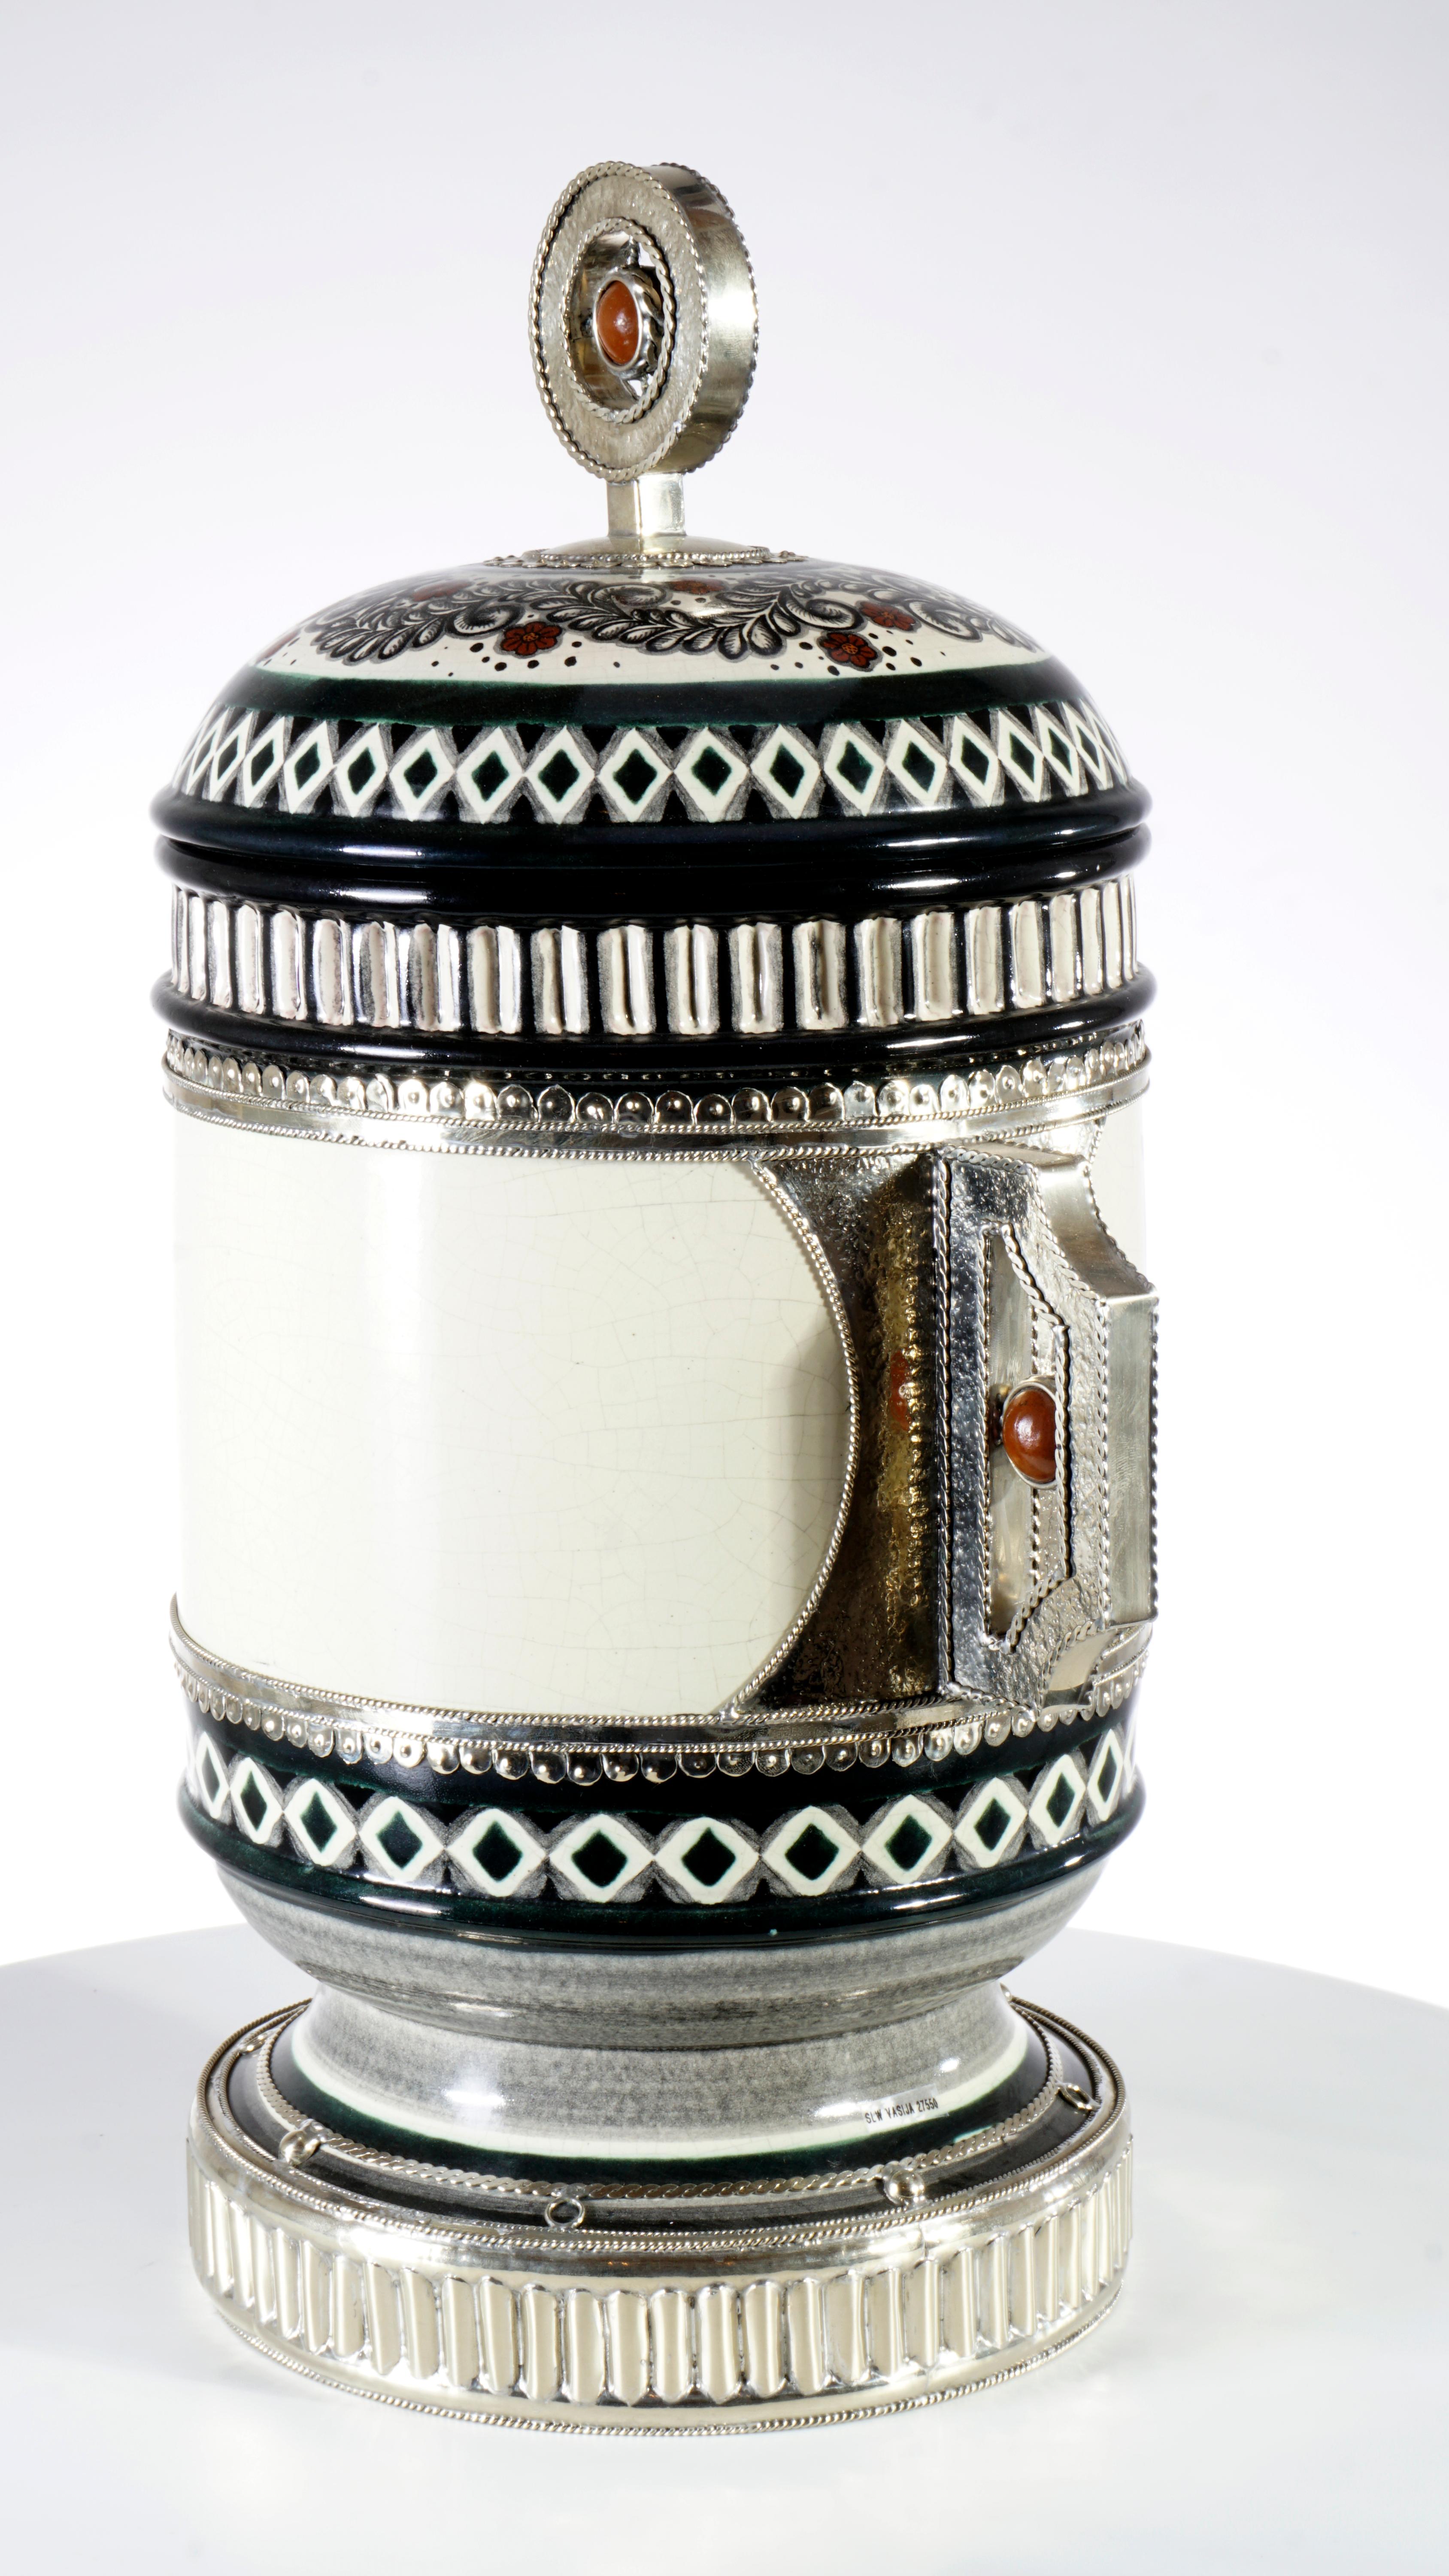 Always unique pieces is what you are going to hear about Jesus Guerrero Santo's work, all the pieces are handmade and created one by one it takes months to produce each peace.
This ceramic and White metal (alpaca) Jar, was created in Tonalá,